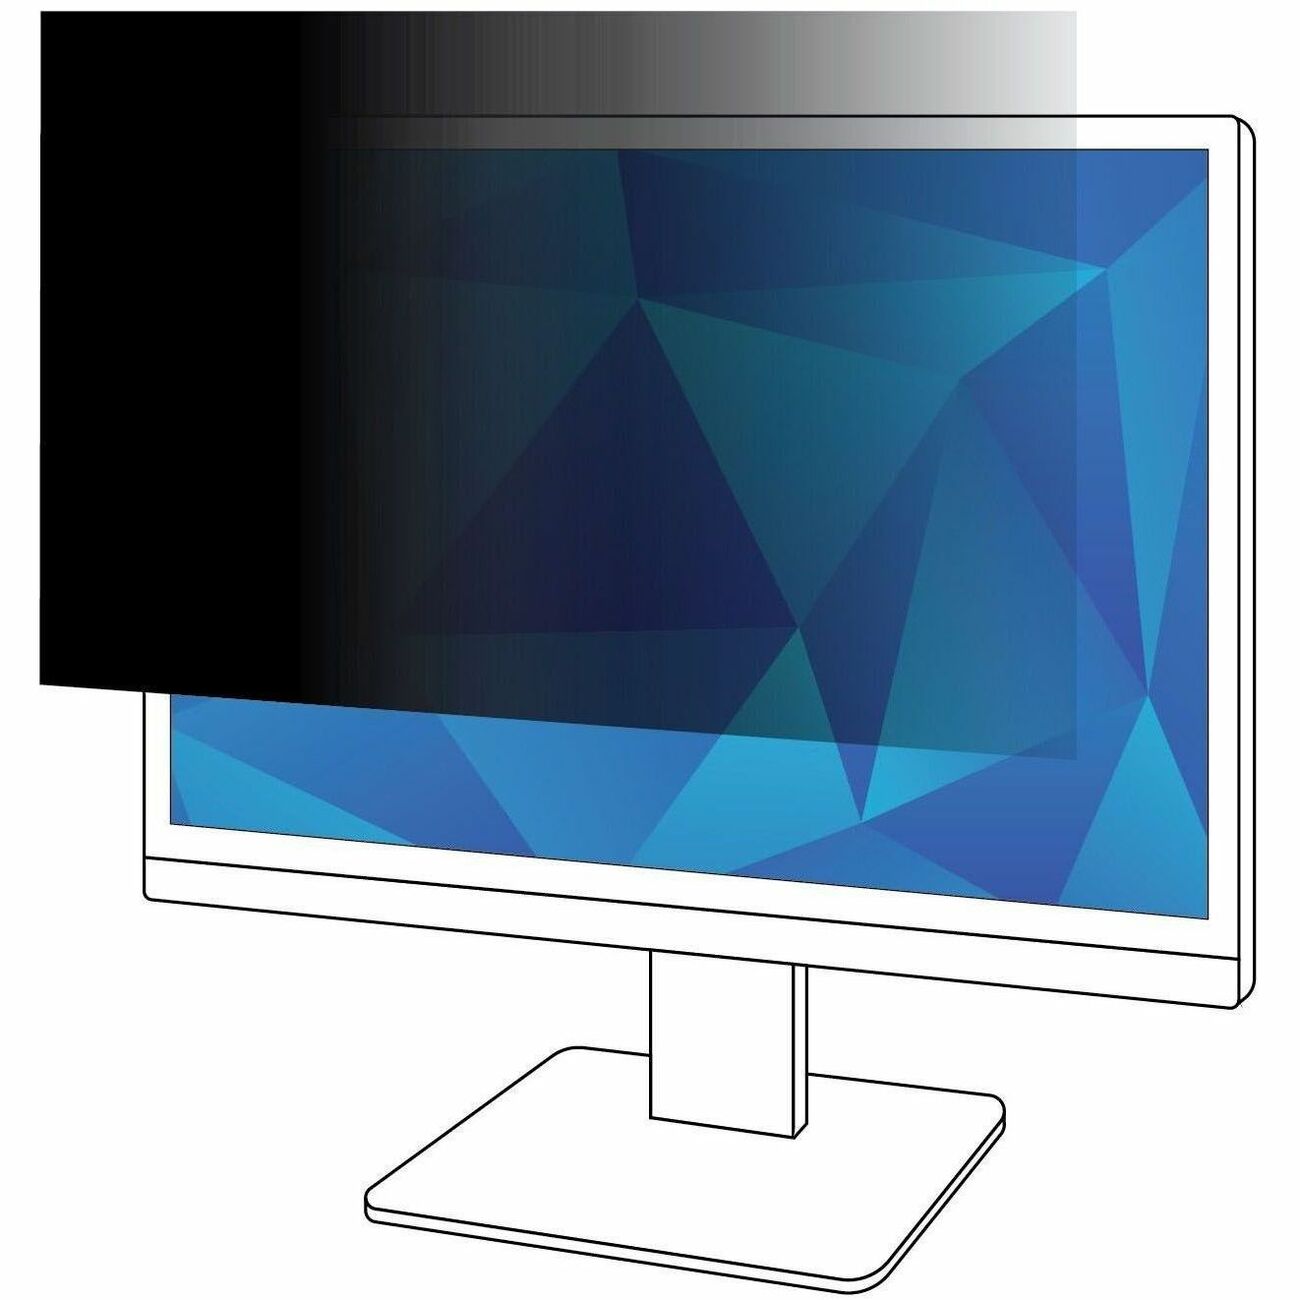 3m-privacy-filter-for-32in-monitor-169-pf320w9b-for-32-widescreen-lcd-monitor-169-scratch-resistant-fingerprint-resistant-dust-resistant-anti-glare_mmmpf320w9b - 1